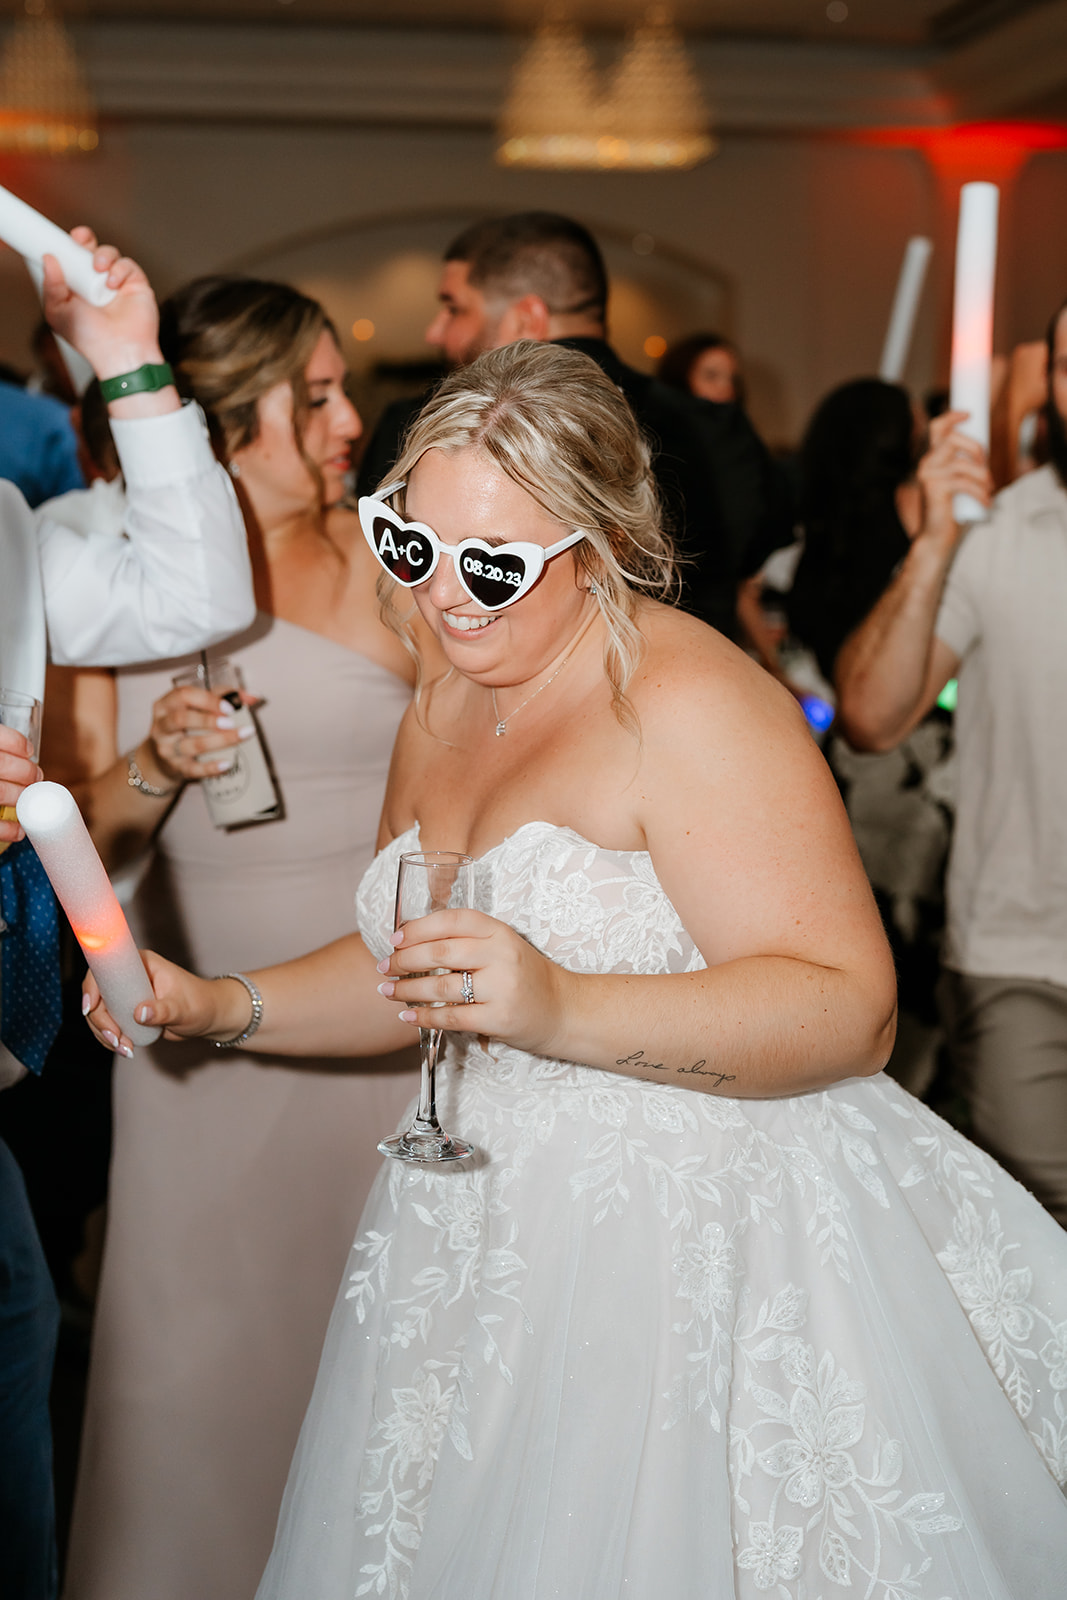 A bride wearing glasses with "bride" written on them is holding a champagne glass and dancing at a wedding reception.